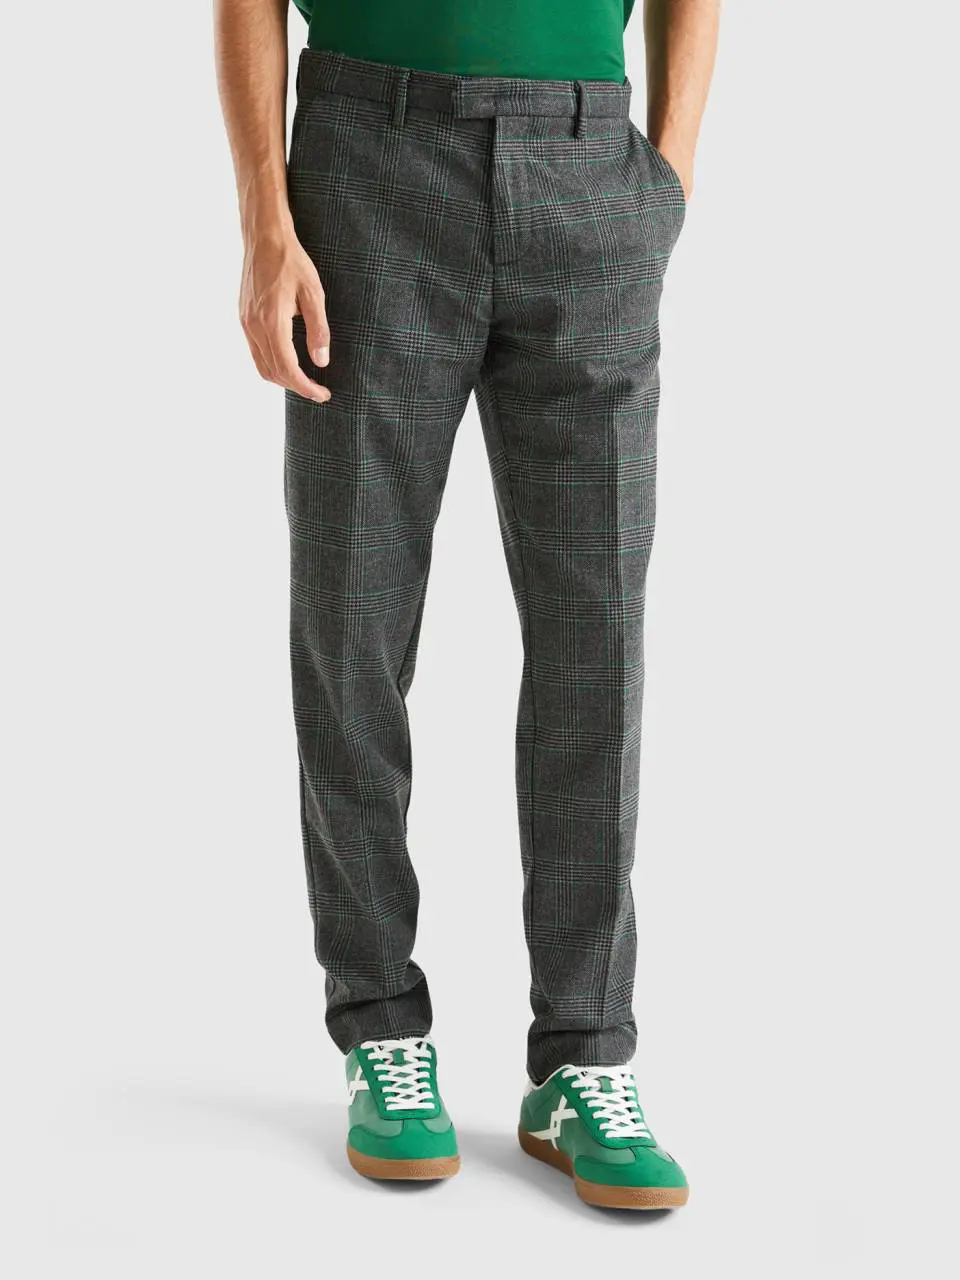 Benetton prince of wales slim fit trousers. 1